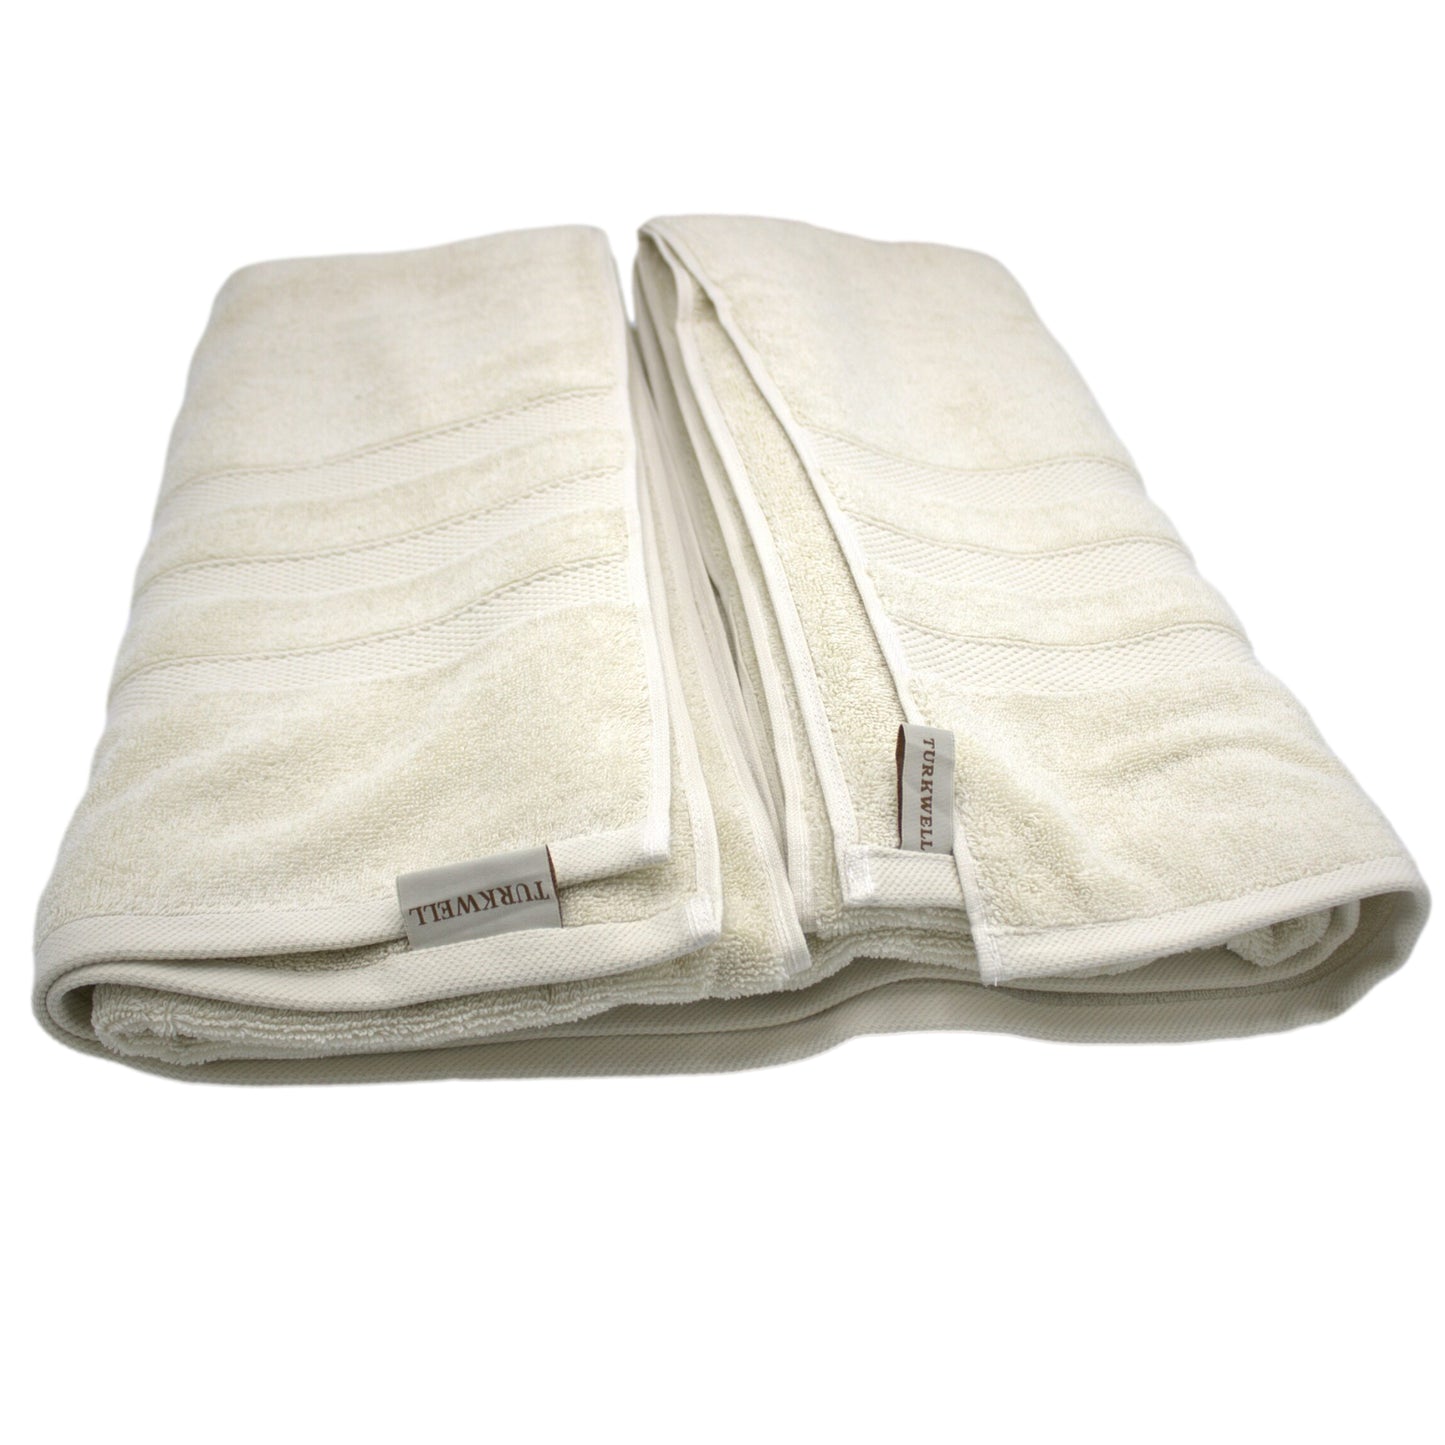 Turkwell Luxury Bath Sheets Towels Set, 100% Combed Cotton, 35x70 in, Extra Large Beige Bath Towels  Set of 2